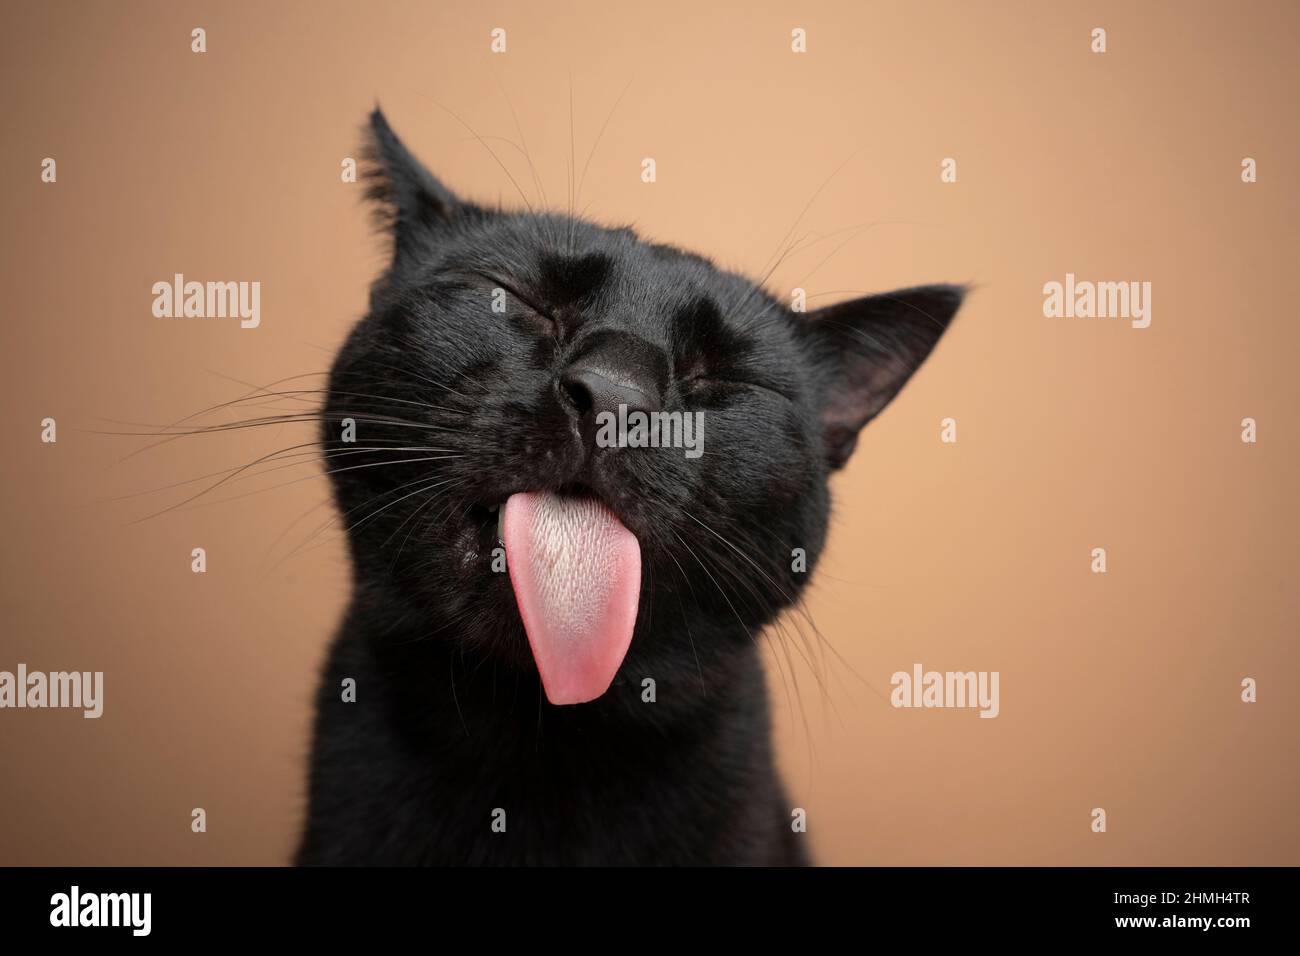 funny black cat sticking out tongue on brown background Stock Photo